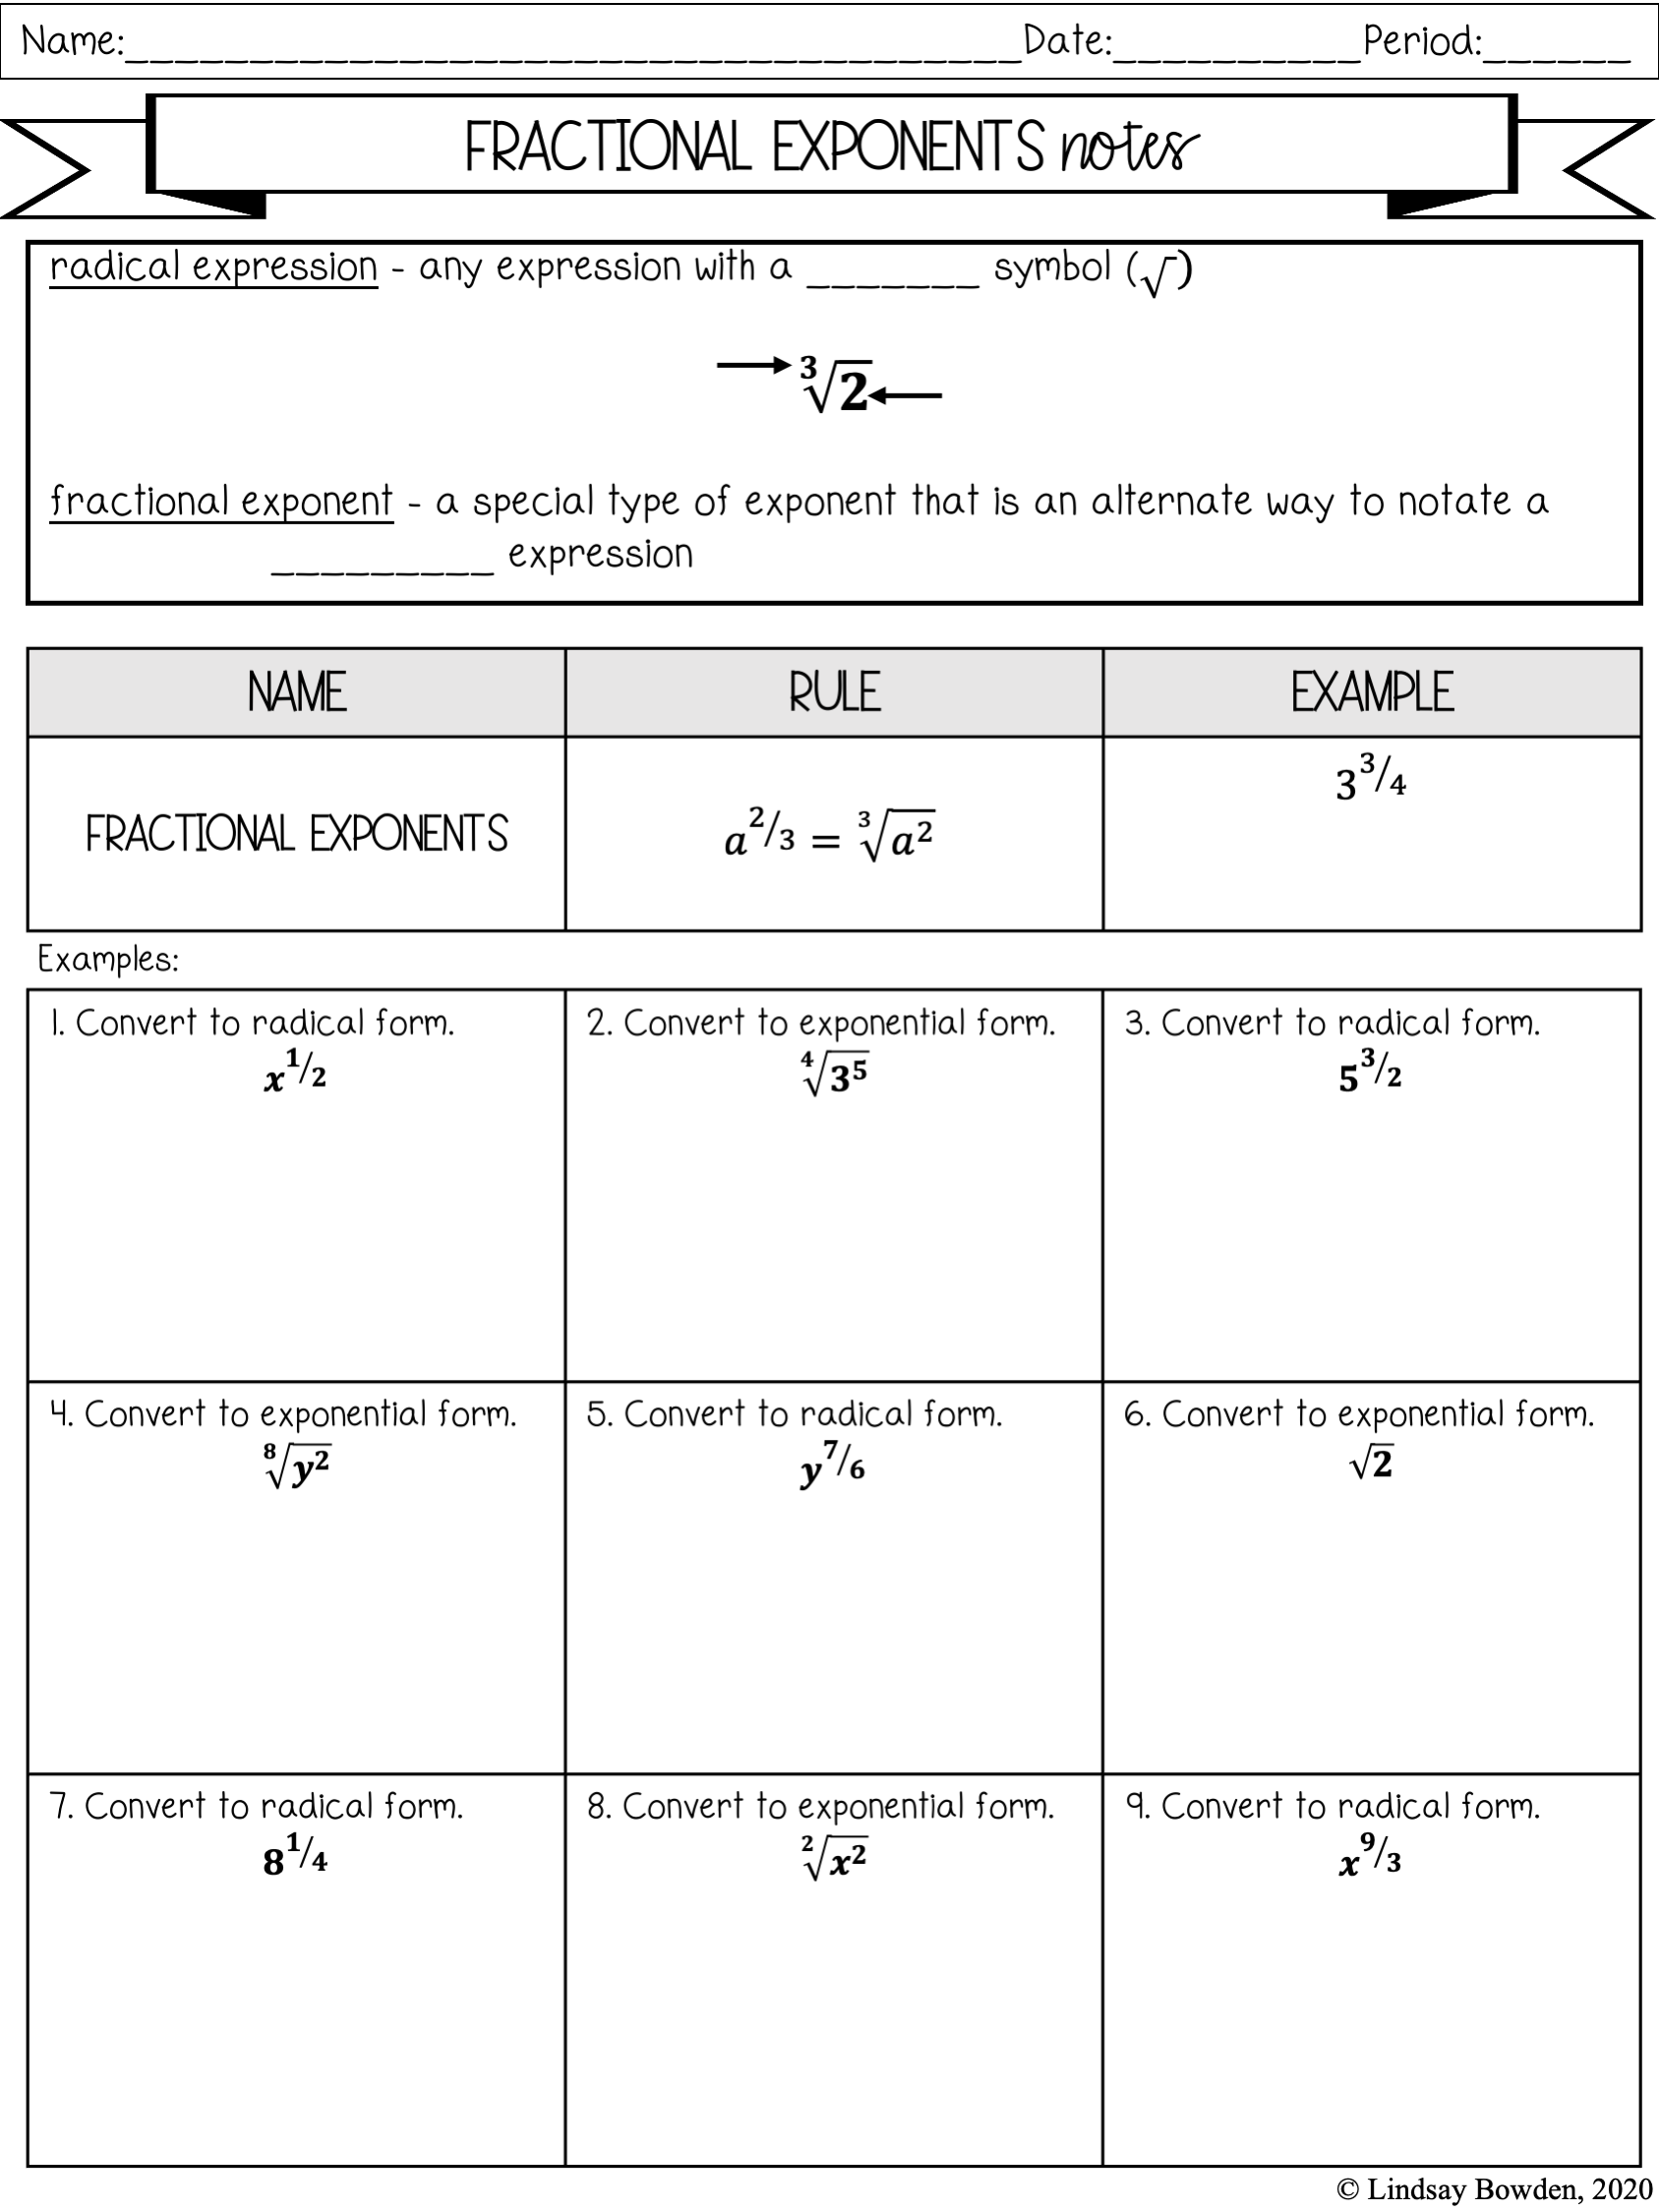 exponent-rules-notes-and-worksheets-lindsay-bowden